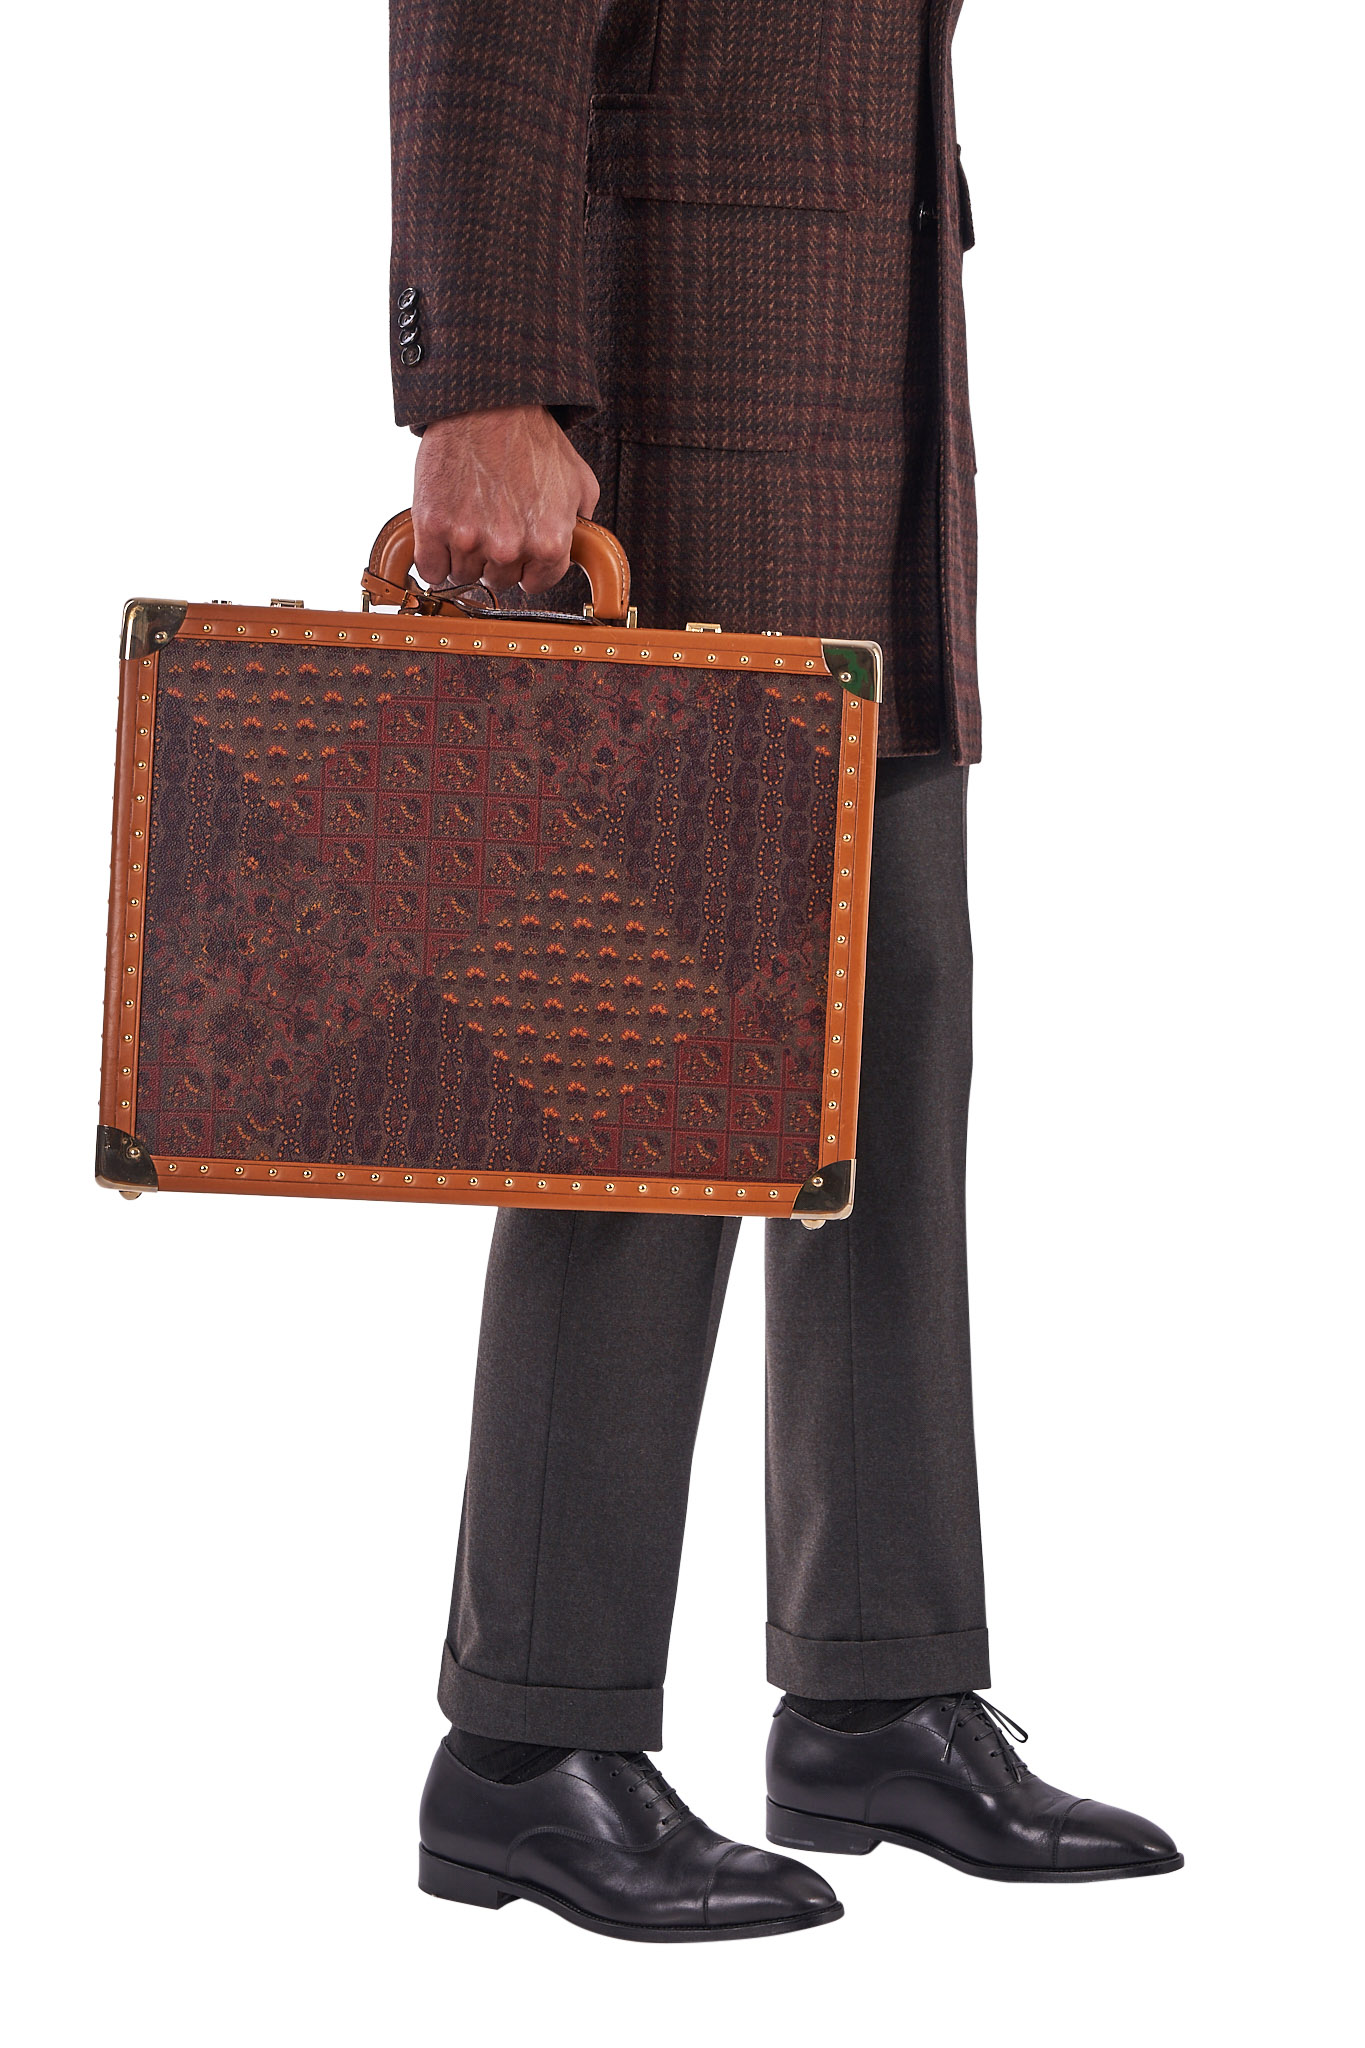 Goyard Rare Rolling Suitcase Luggage With Steamer Trunk Details